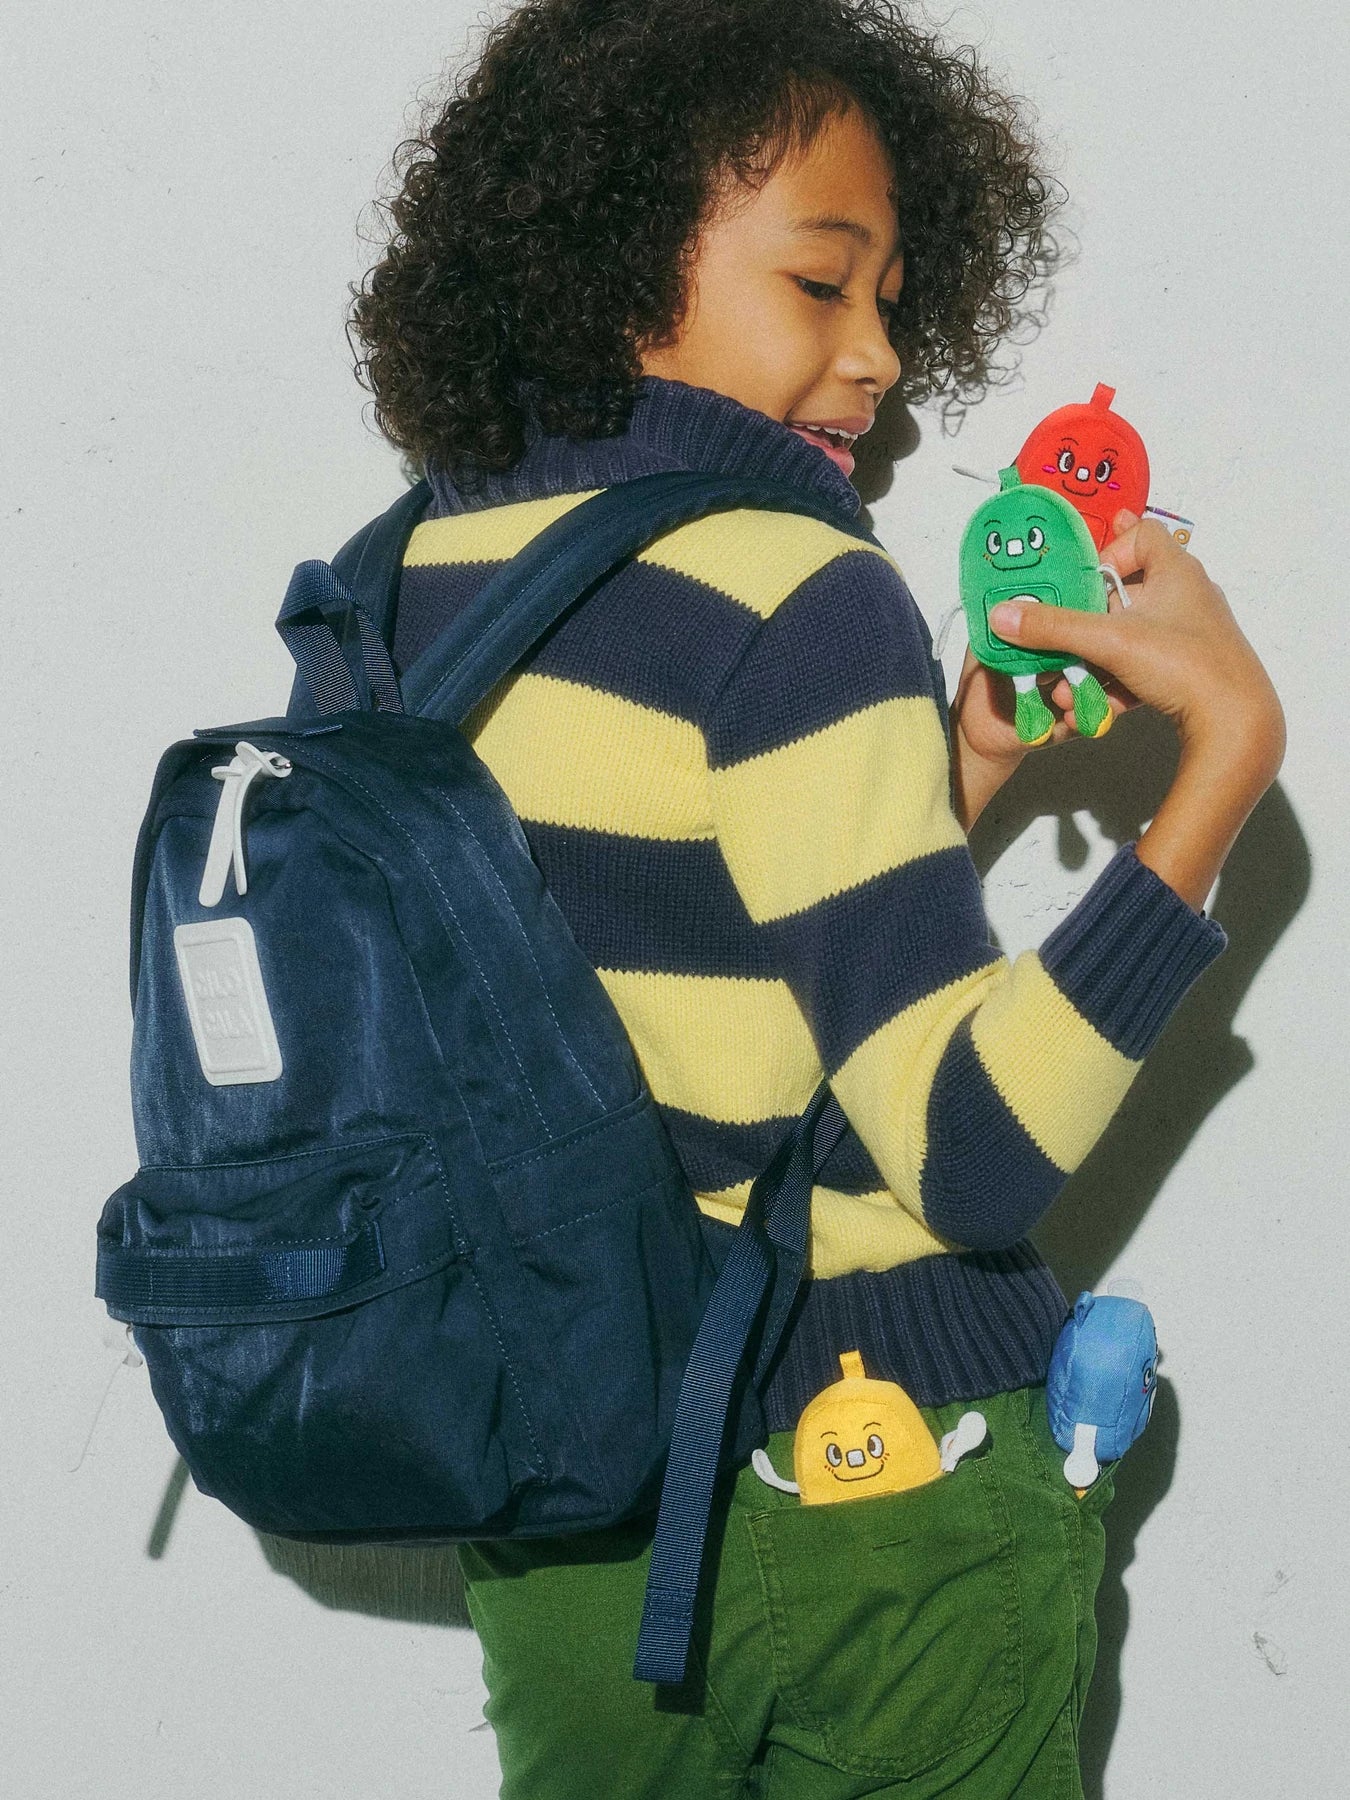 BACKPACK S SIZE